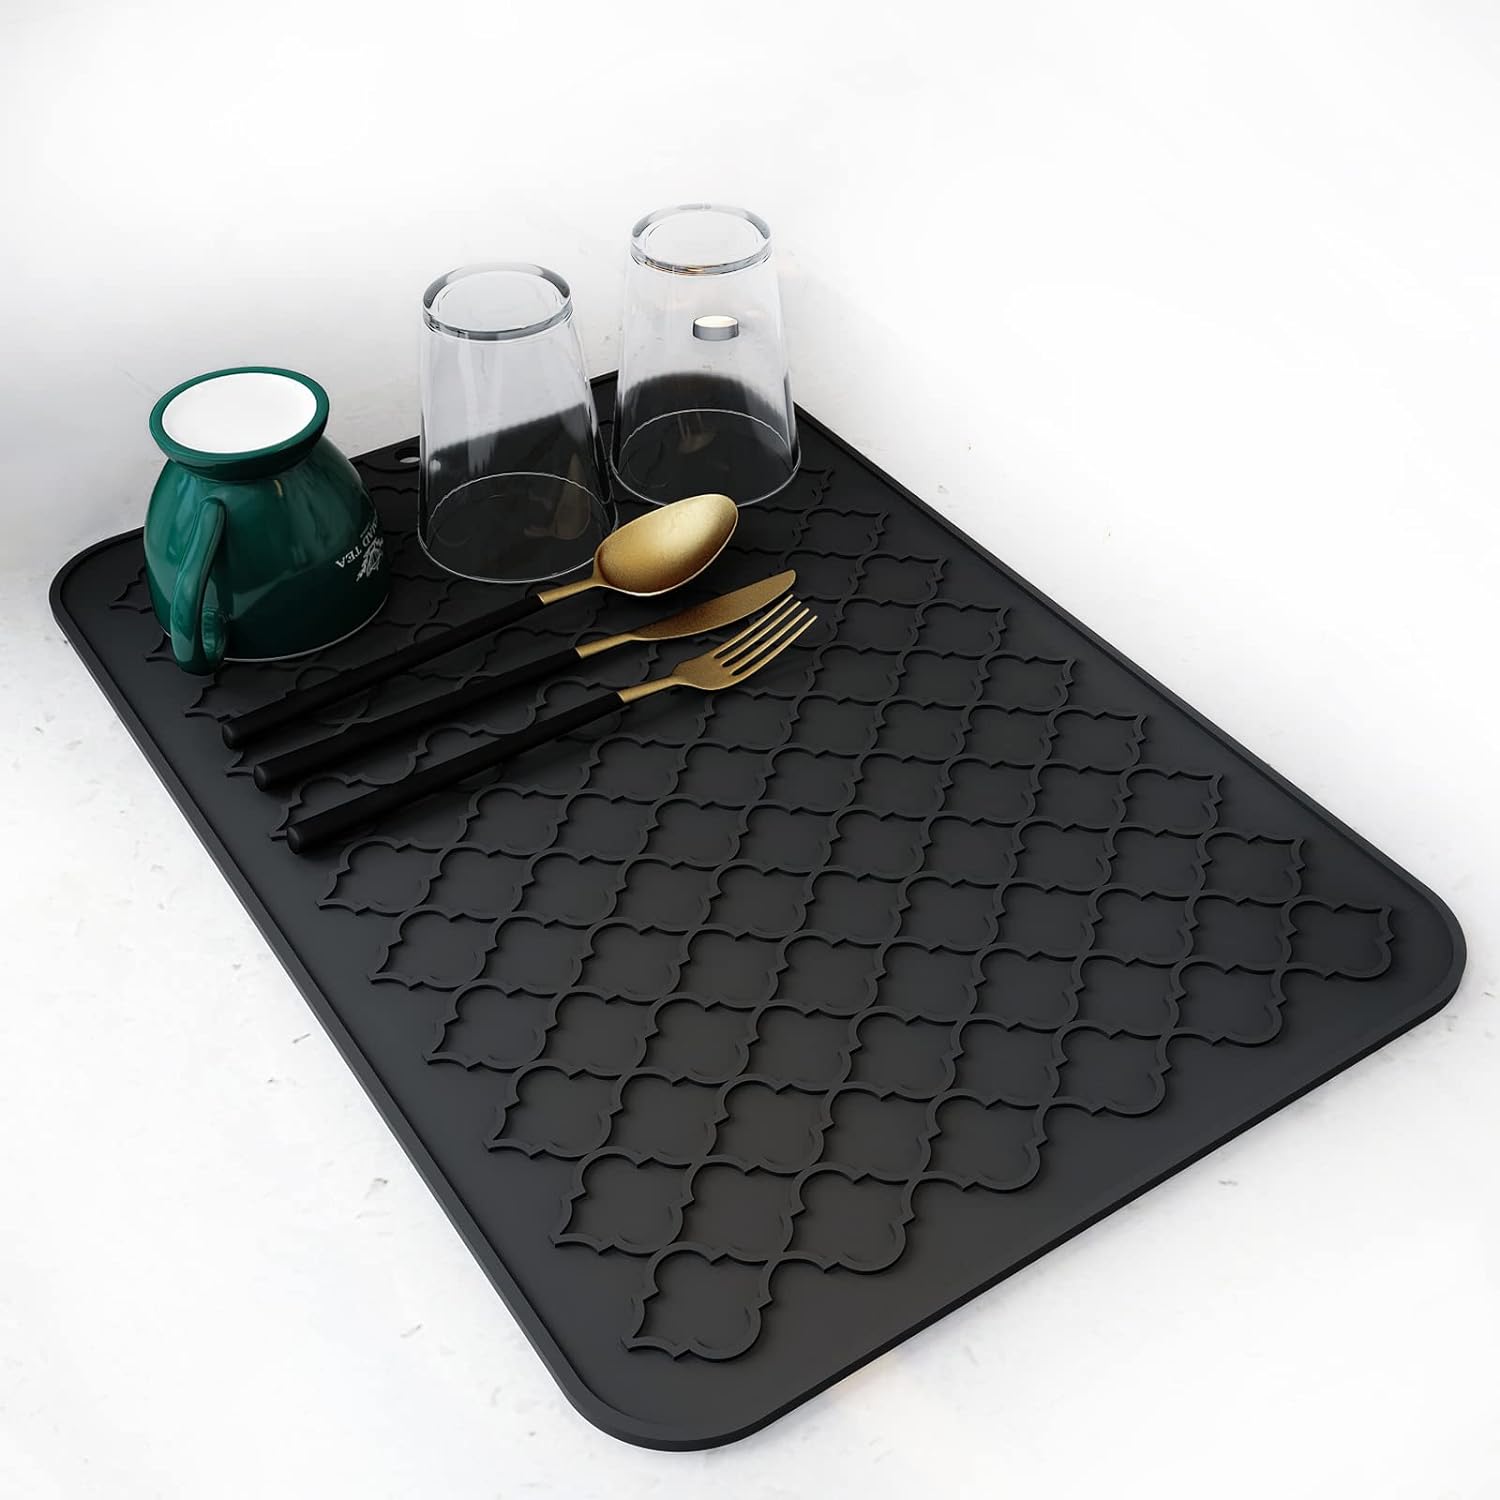 AMOAMI-Dish Drying Mats for Kitchen Counter-Silicone Dish Drying Mat-Kitchen Dish Drying Pad Heat Resistant Mat-Kitchen Gadgets Kitchen Accessories Kitchen Small Appliances (12″ x 16, BLACK)